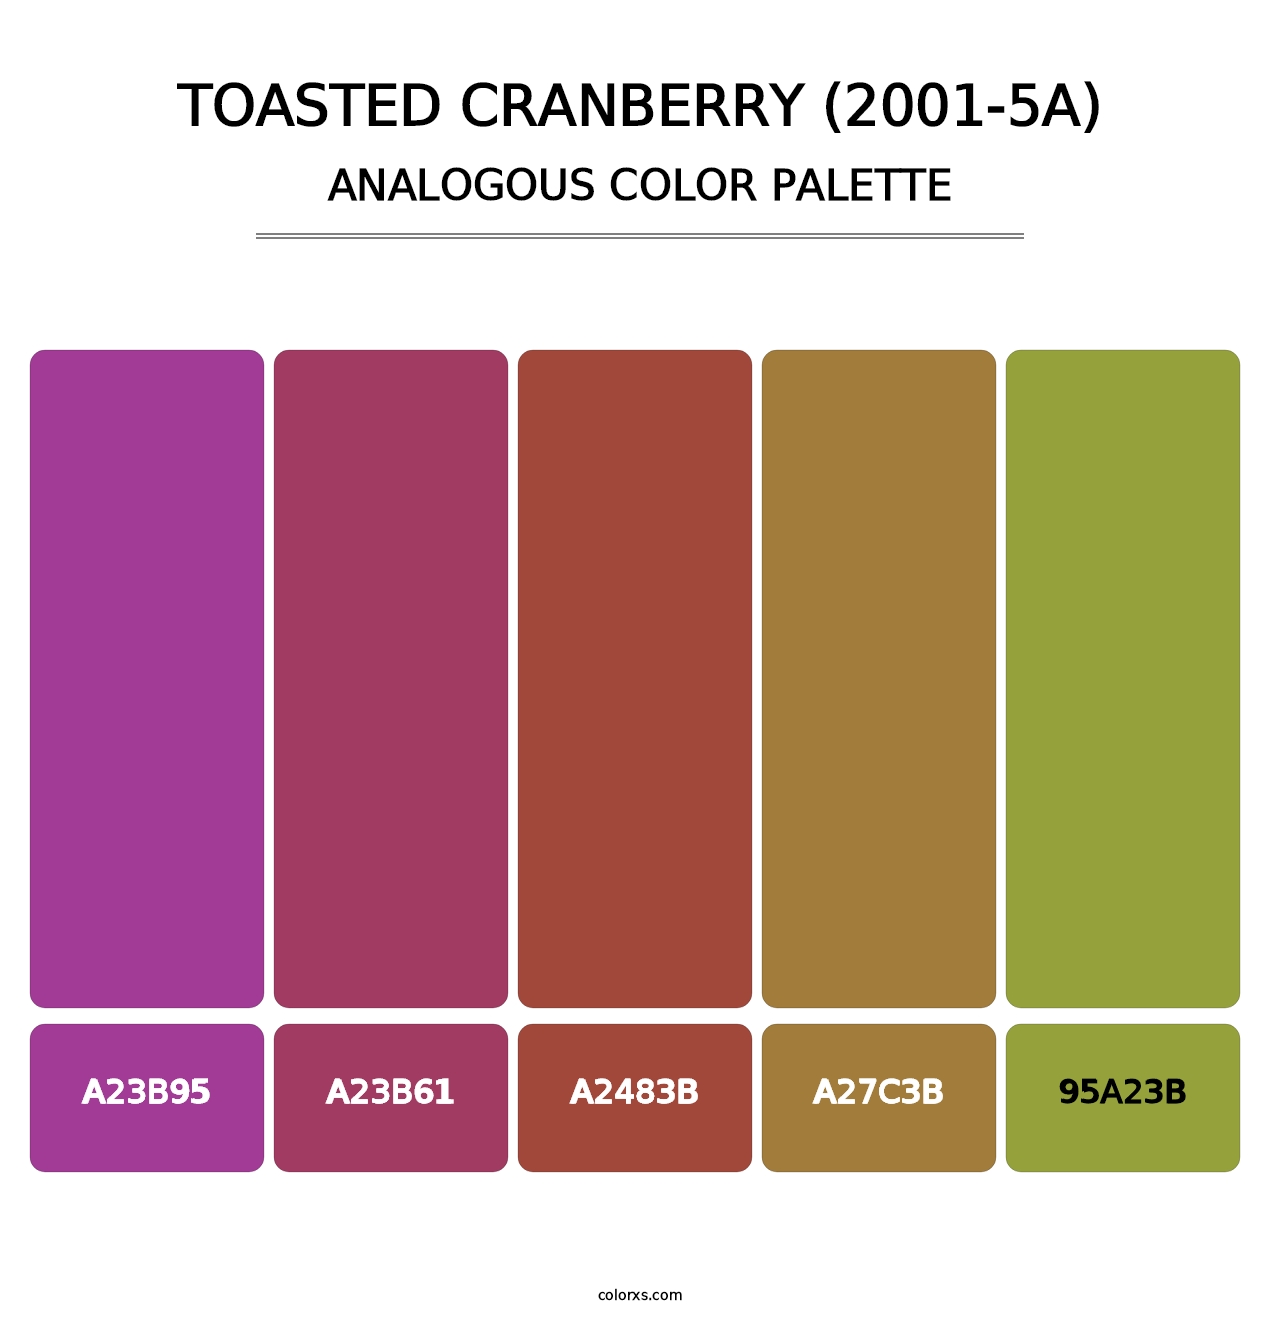 Toasted Cranberry (2001-5A) - Analogous Color Palette